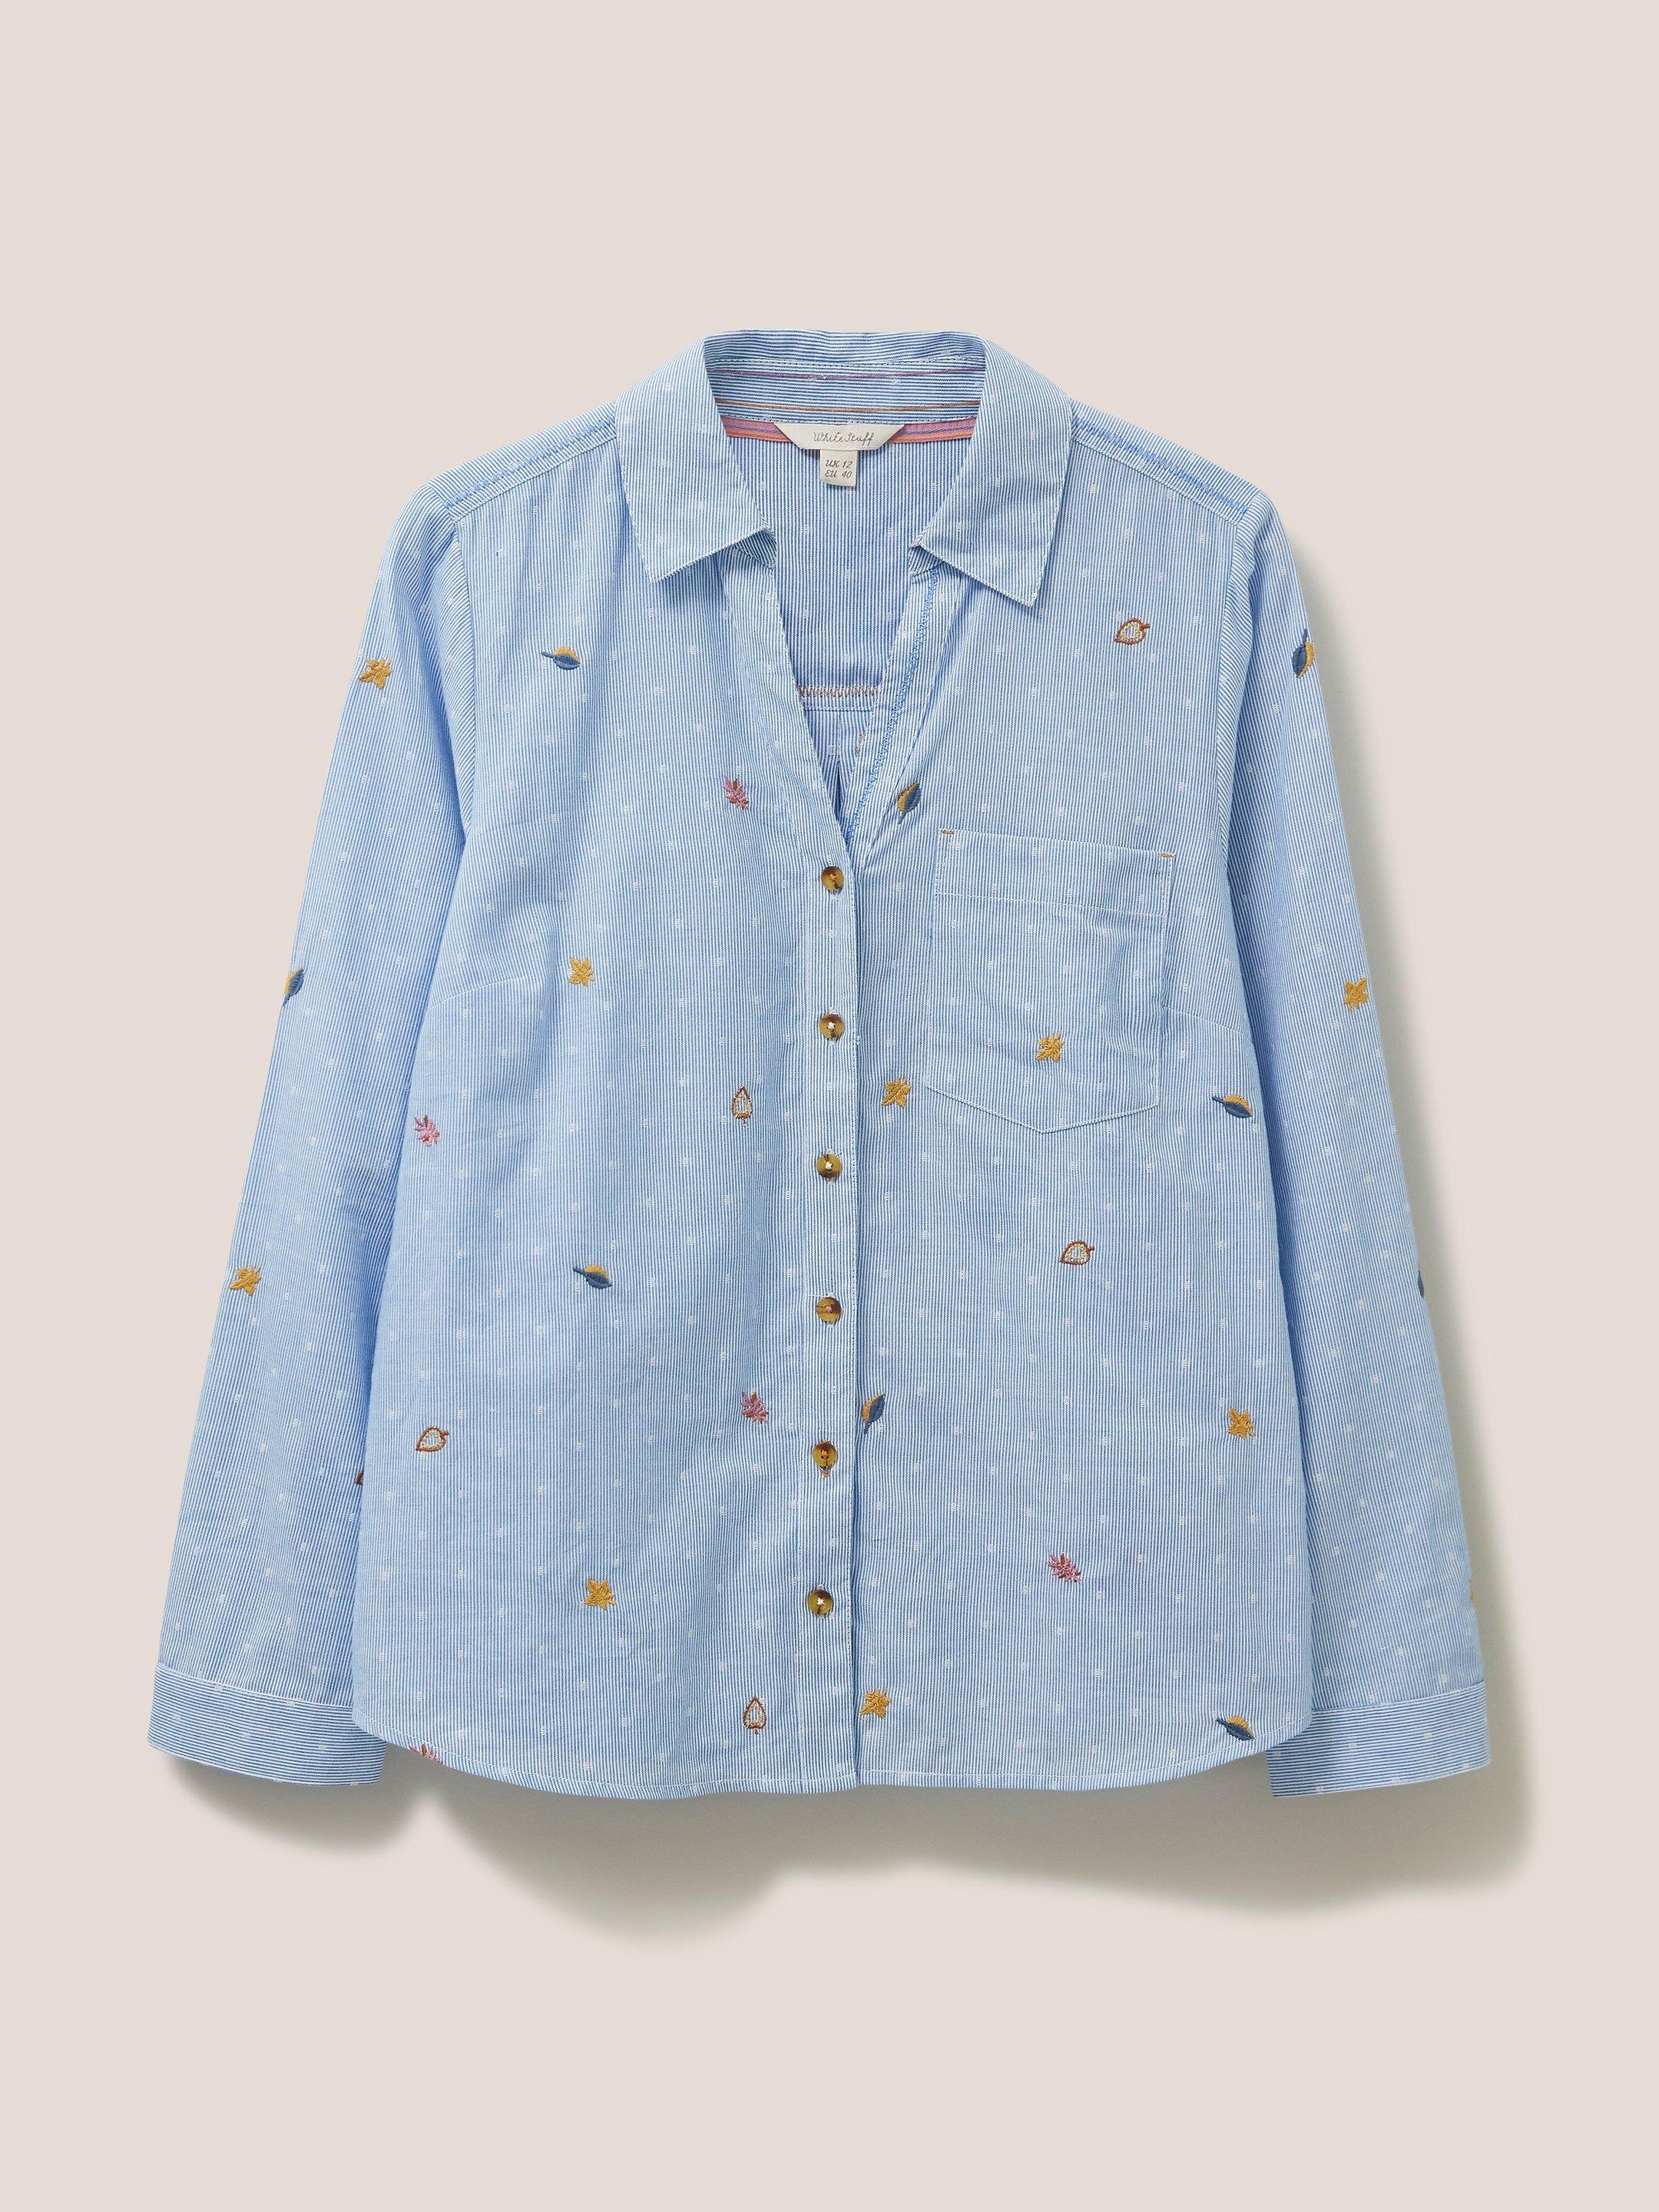 Maple Embroidered Shirt in BLUE MLT - FLAT FRONT